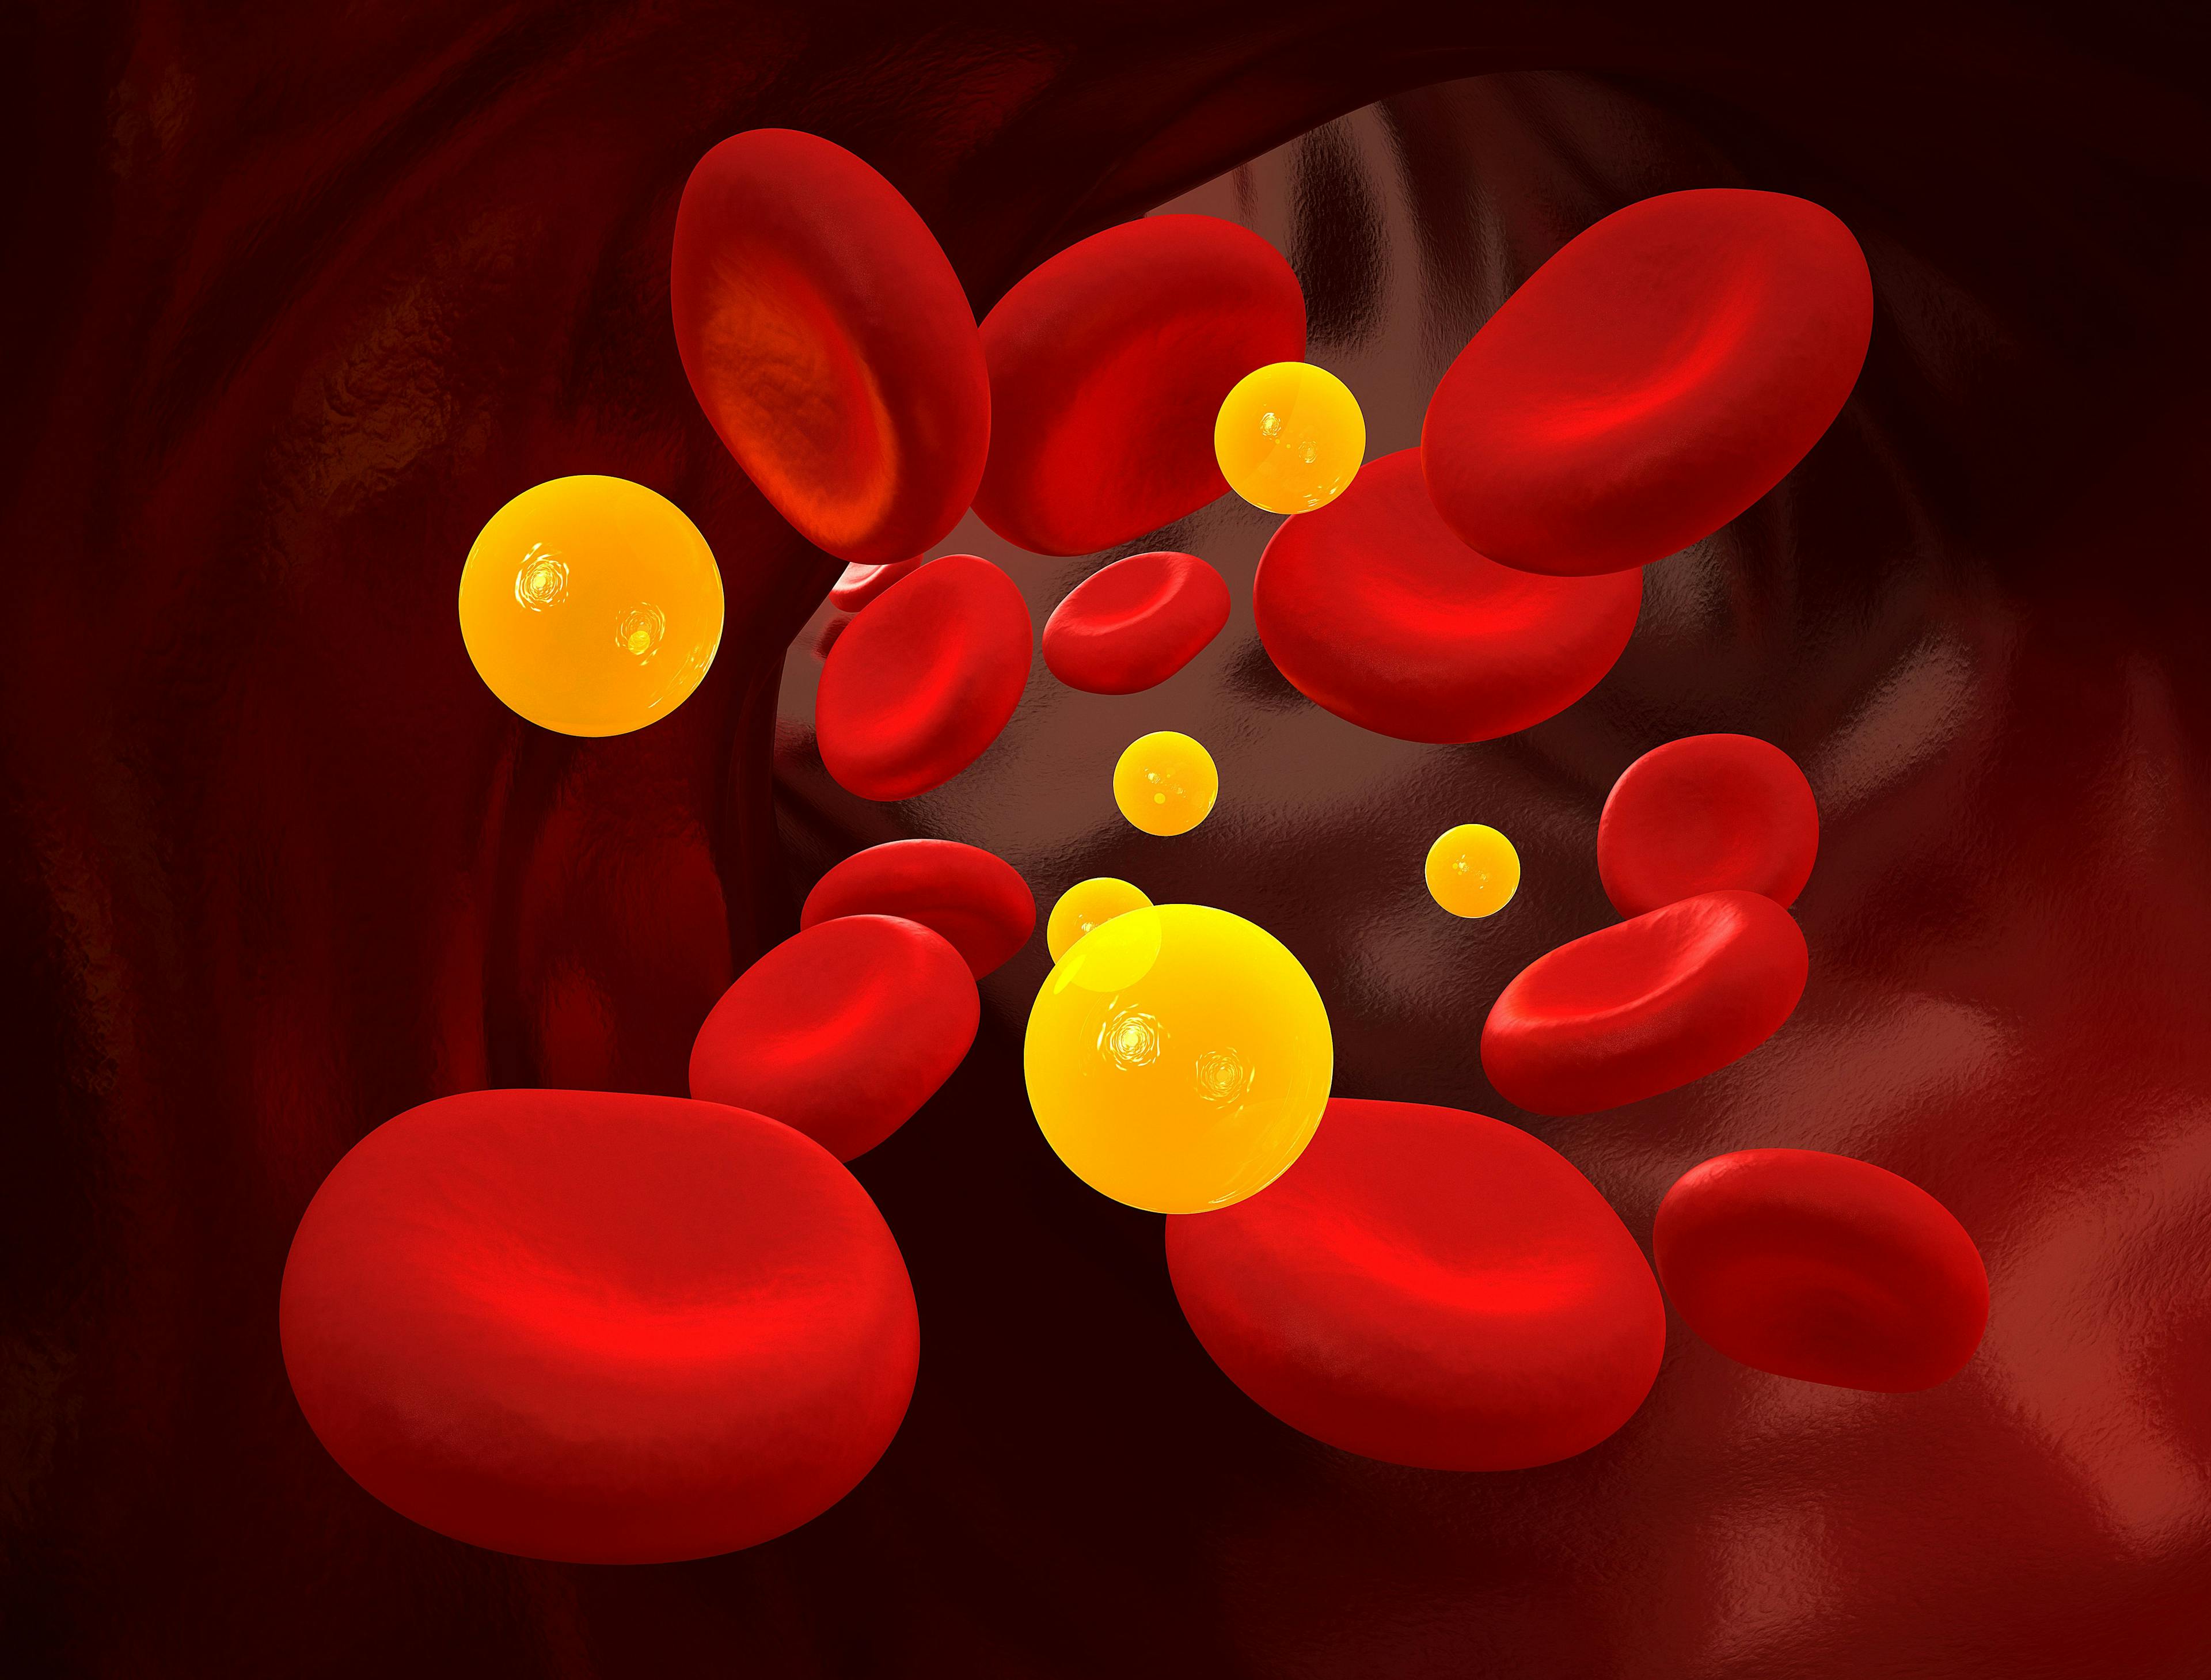 Stock imagery of cholesterol particles in a blood stream.